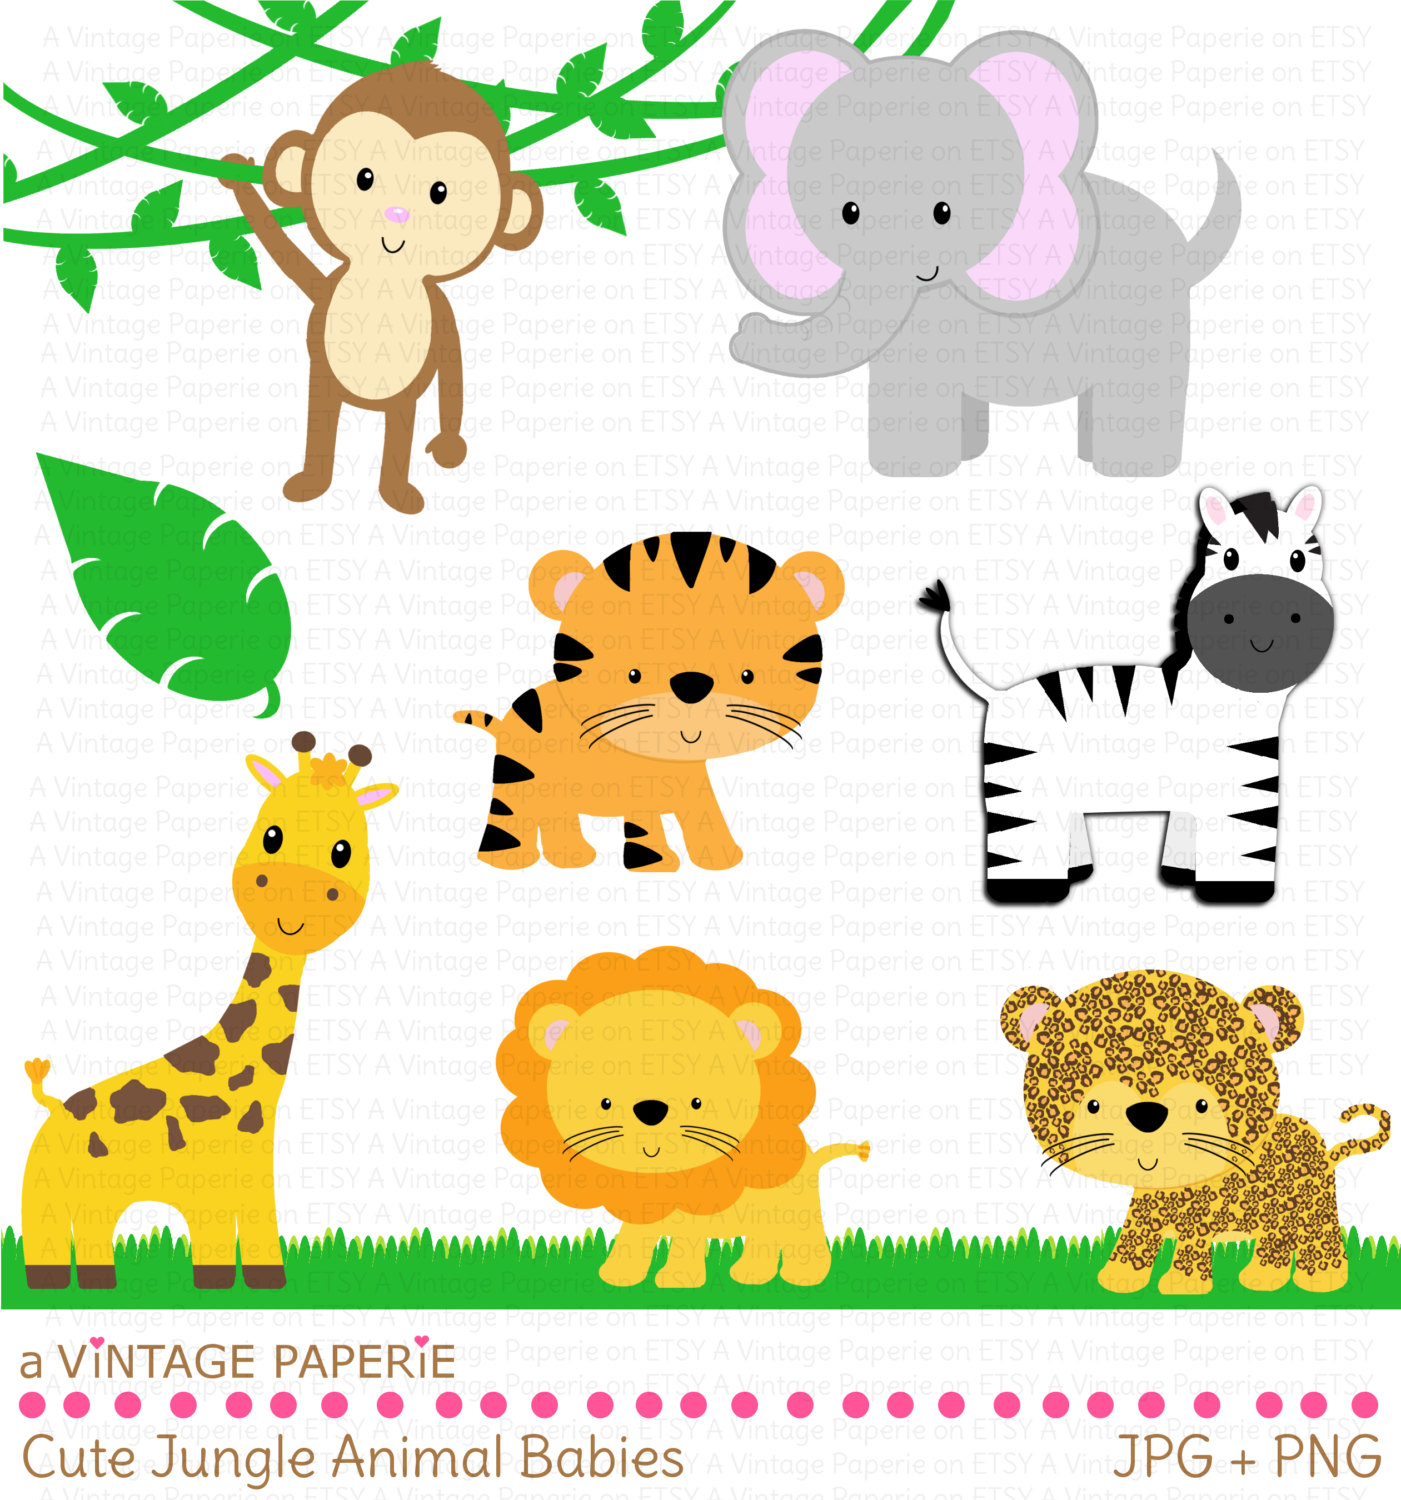 Baby Animal Clipart easy